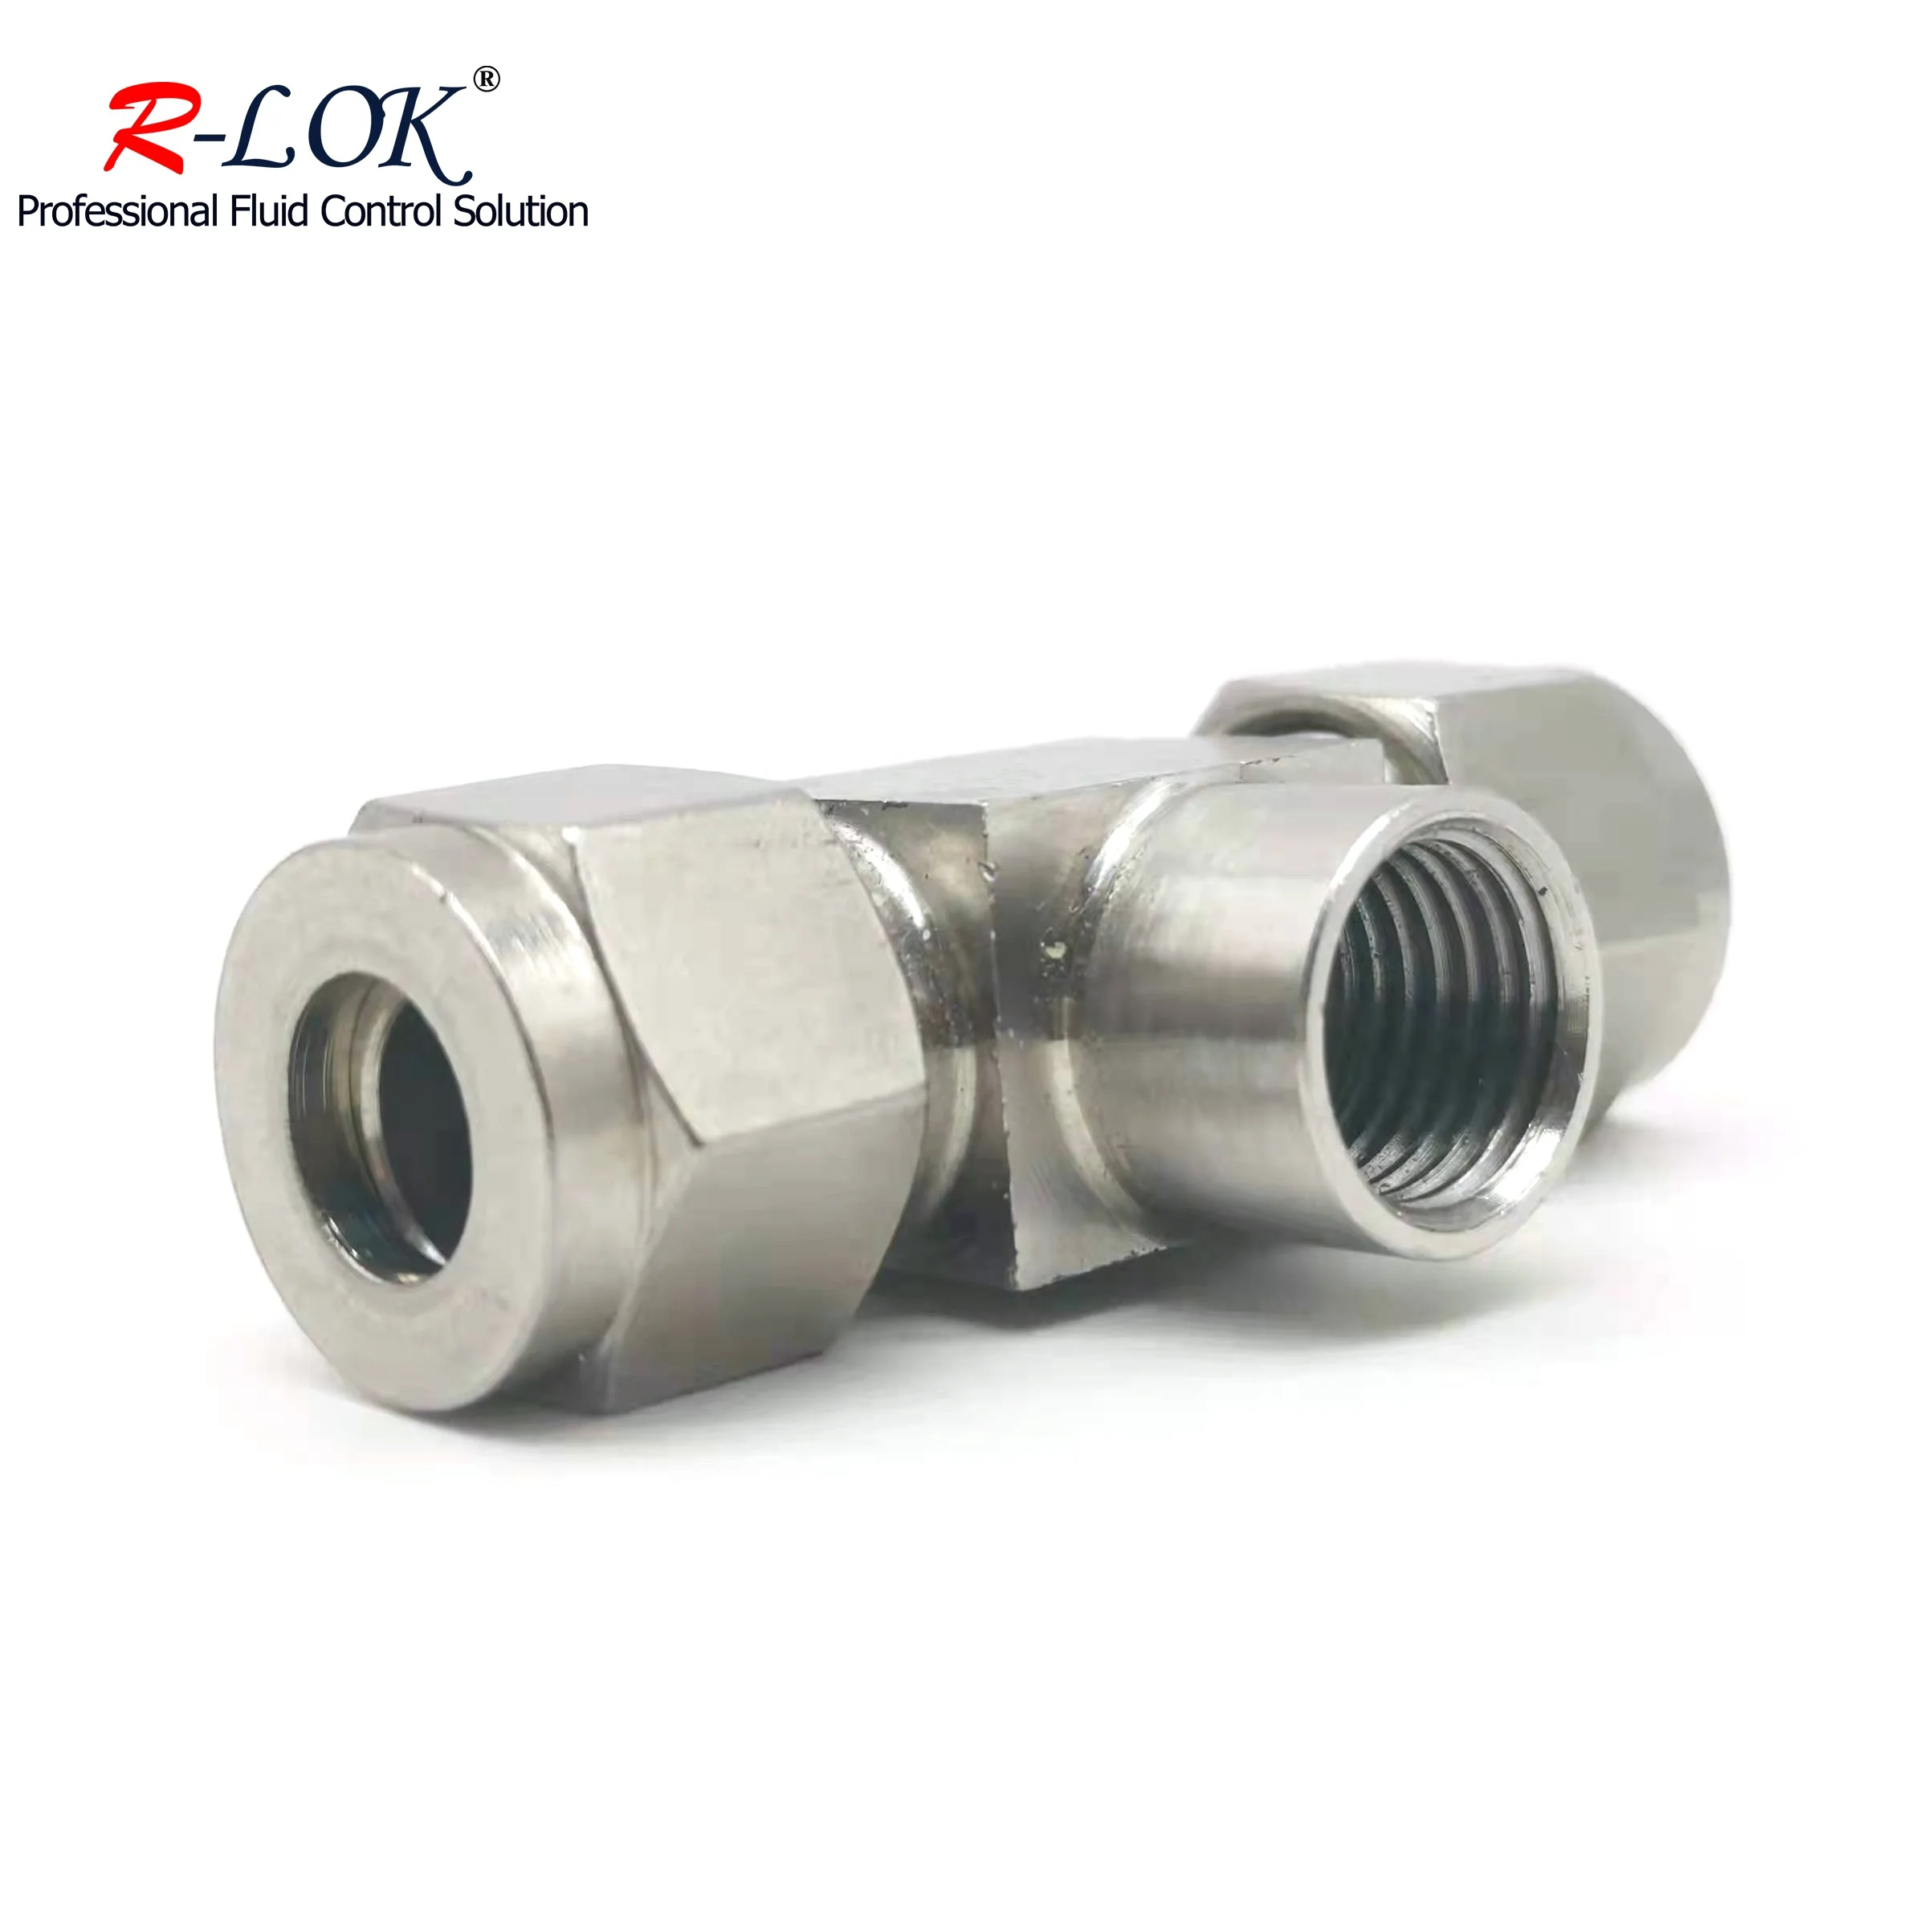 ON SALE Swagelok Tube Fittings Instrumentation Stainless Steel Compression Connector Ss316 Ferrule Female Branch Tee Union